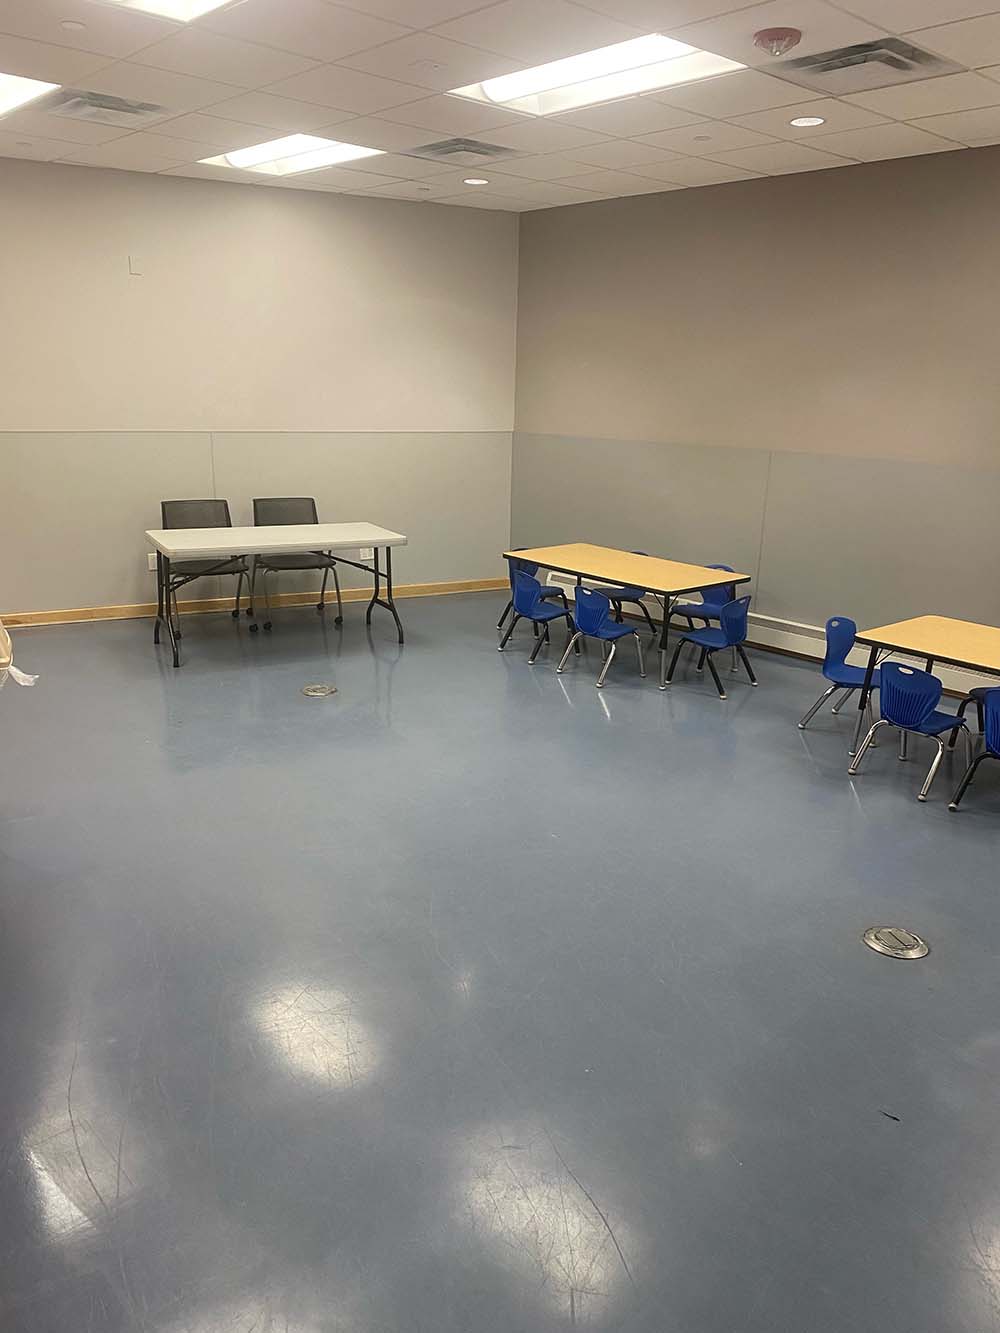 A room with three tables with chairs and a blue floor is shown